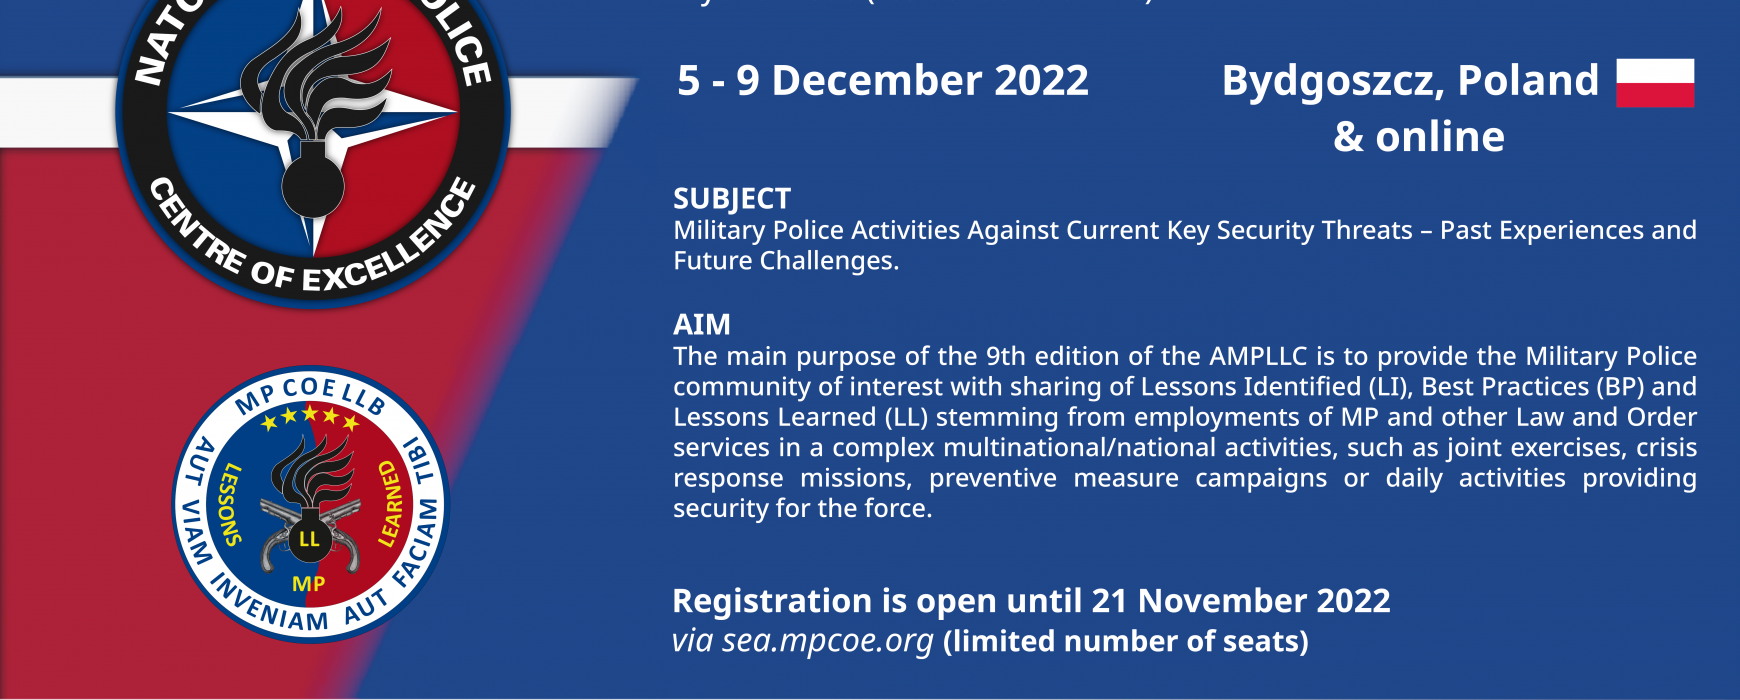 Annual Military Police Lessons Learned Conference 2022 